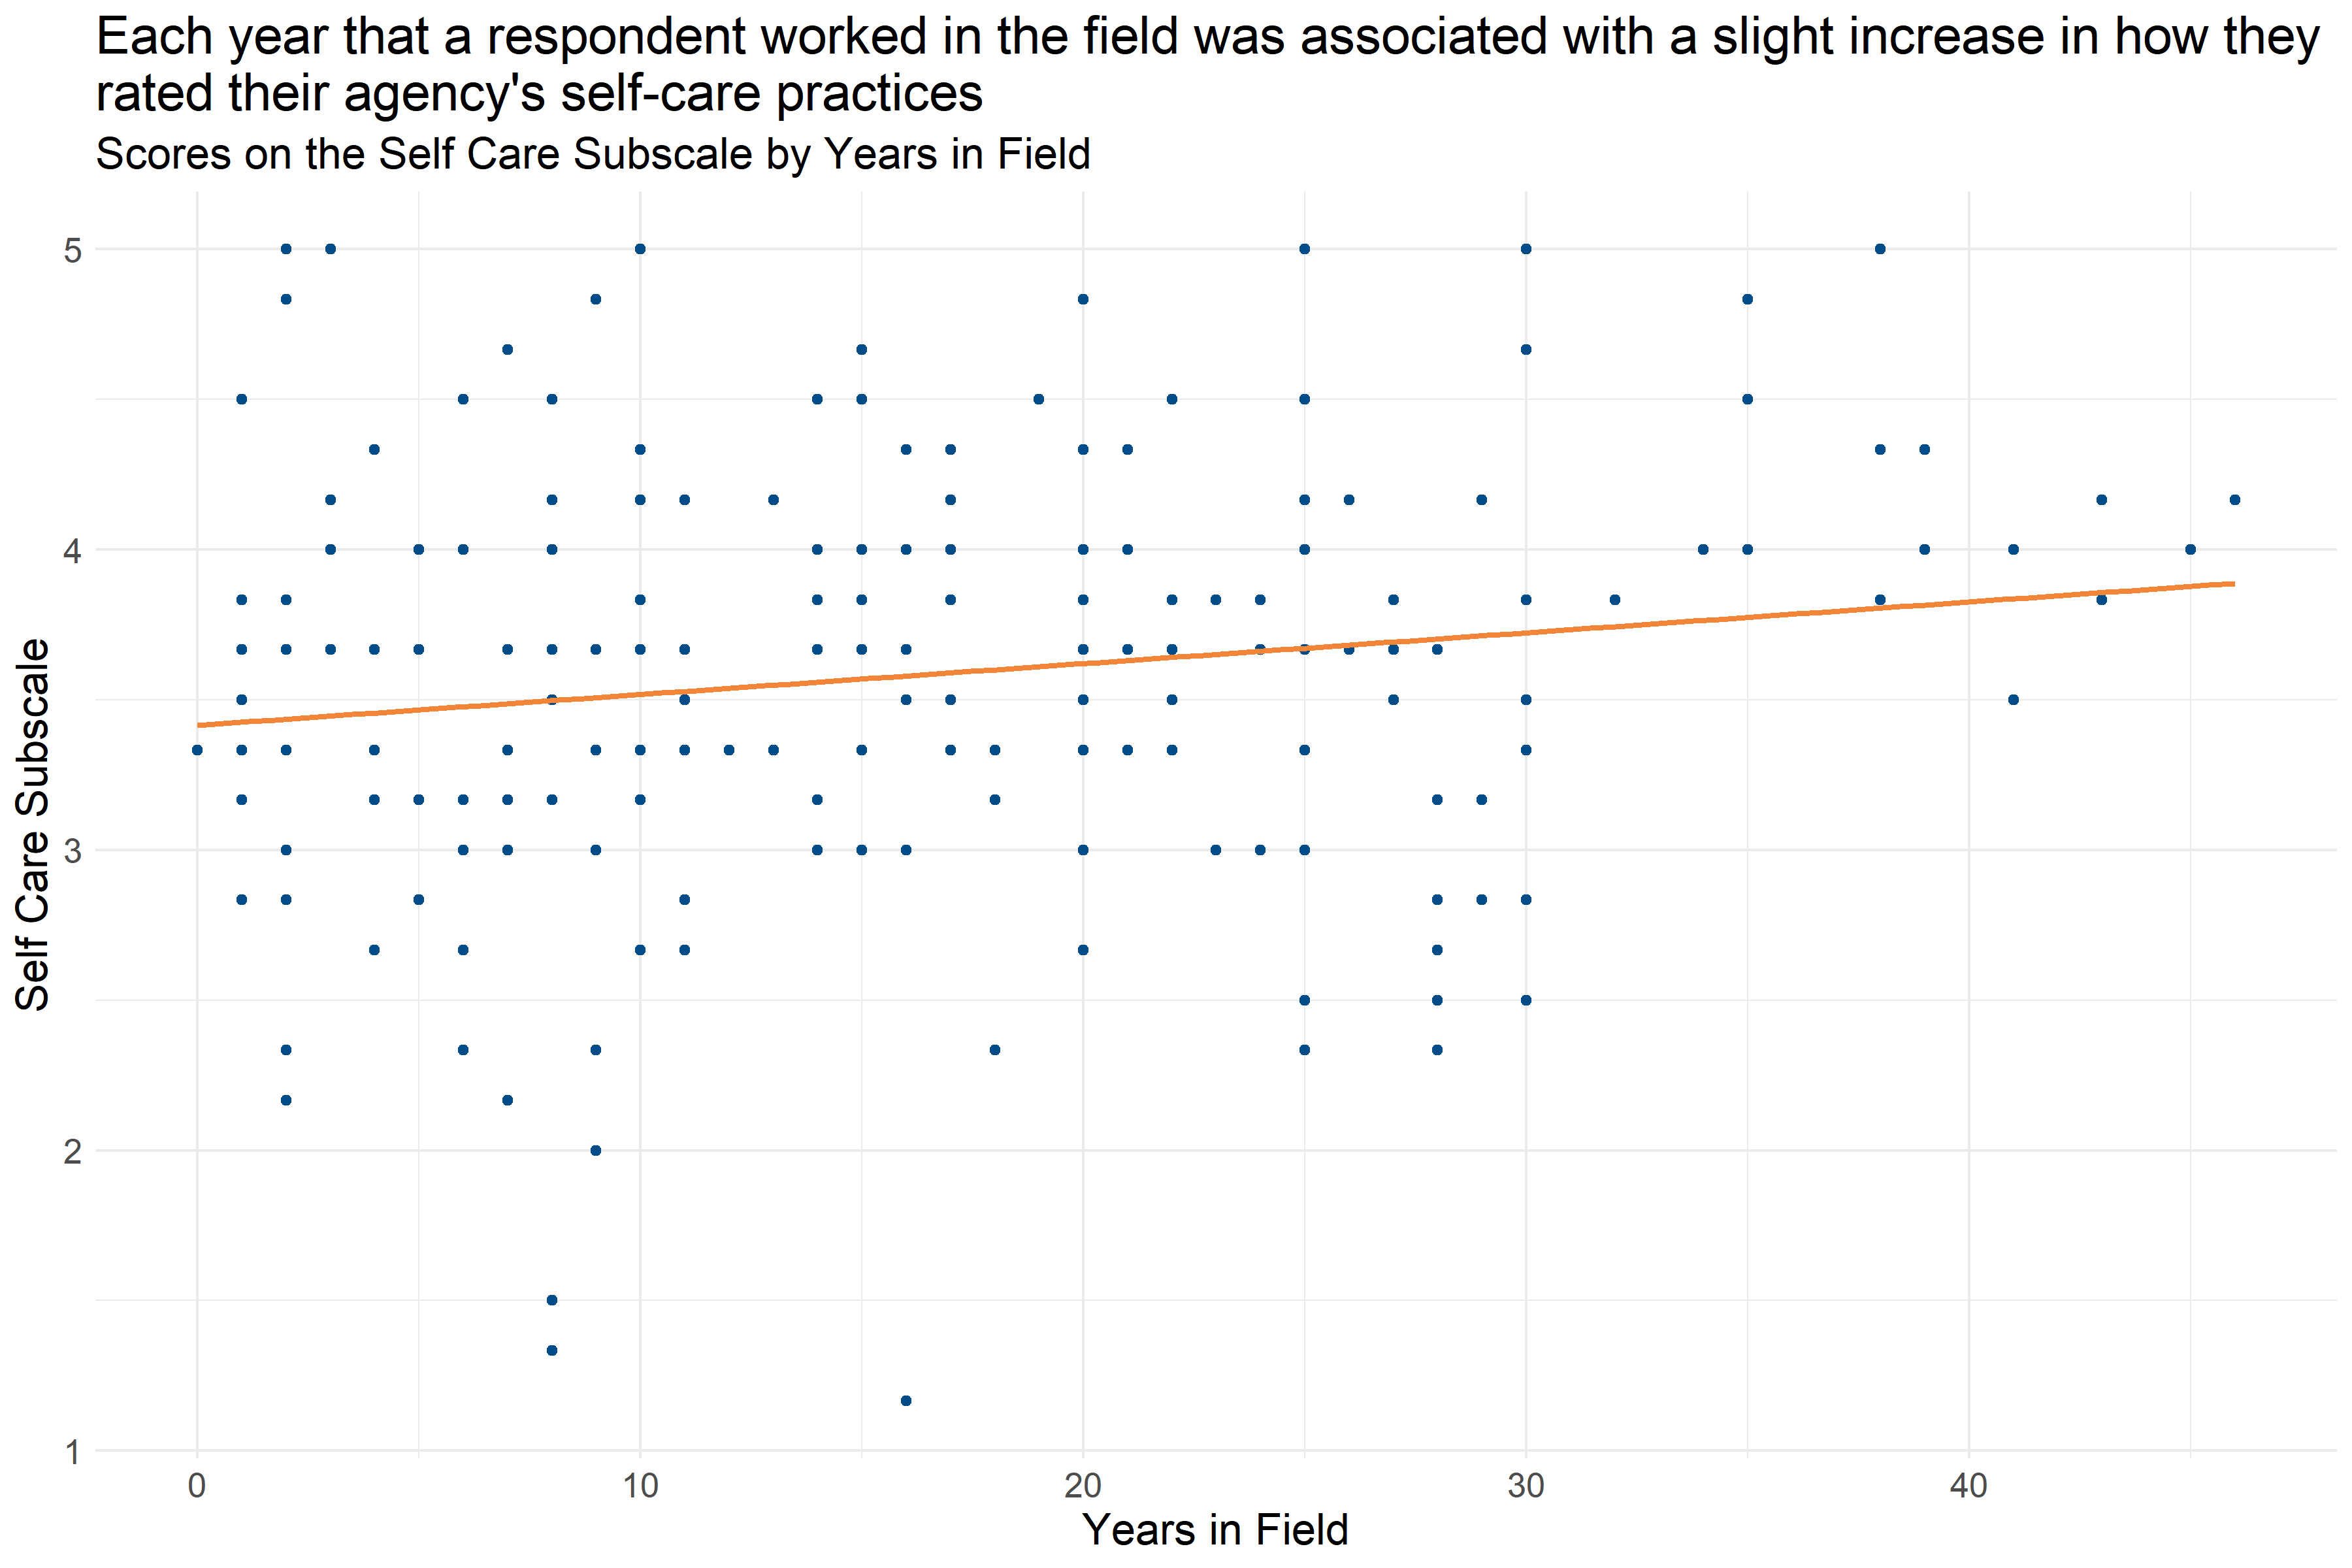 Scatter plot of Years in Field and Self Care Subscale Score